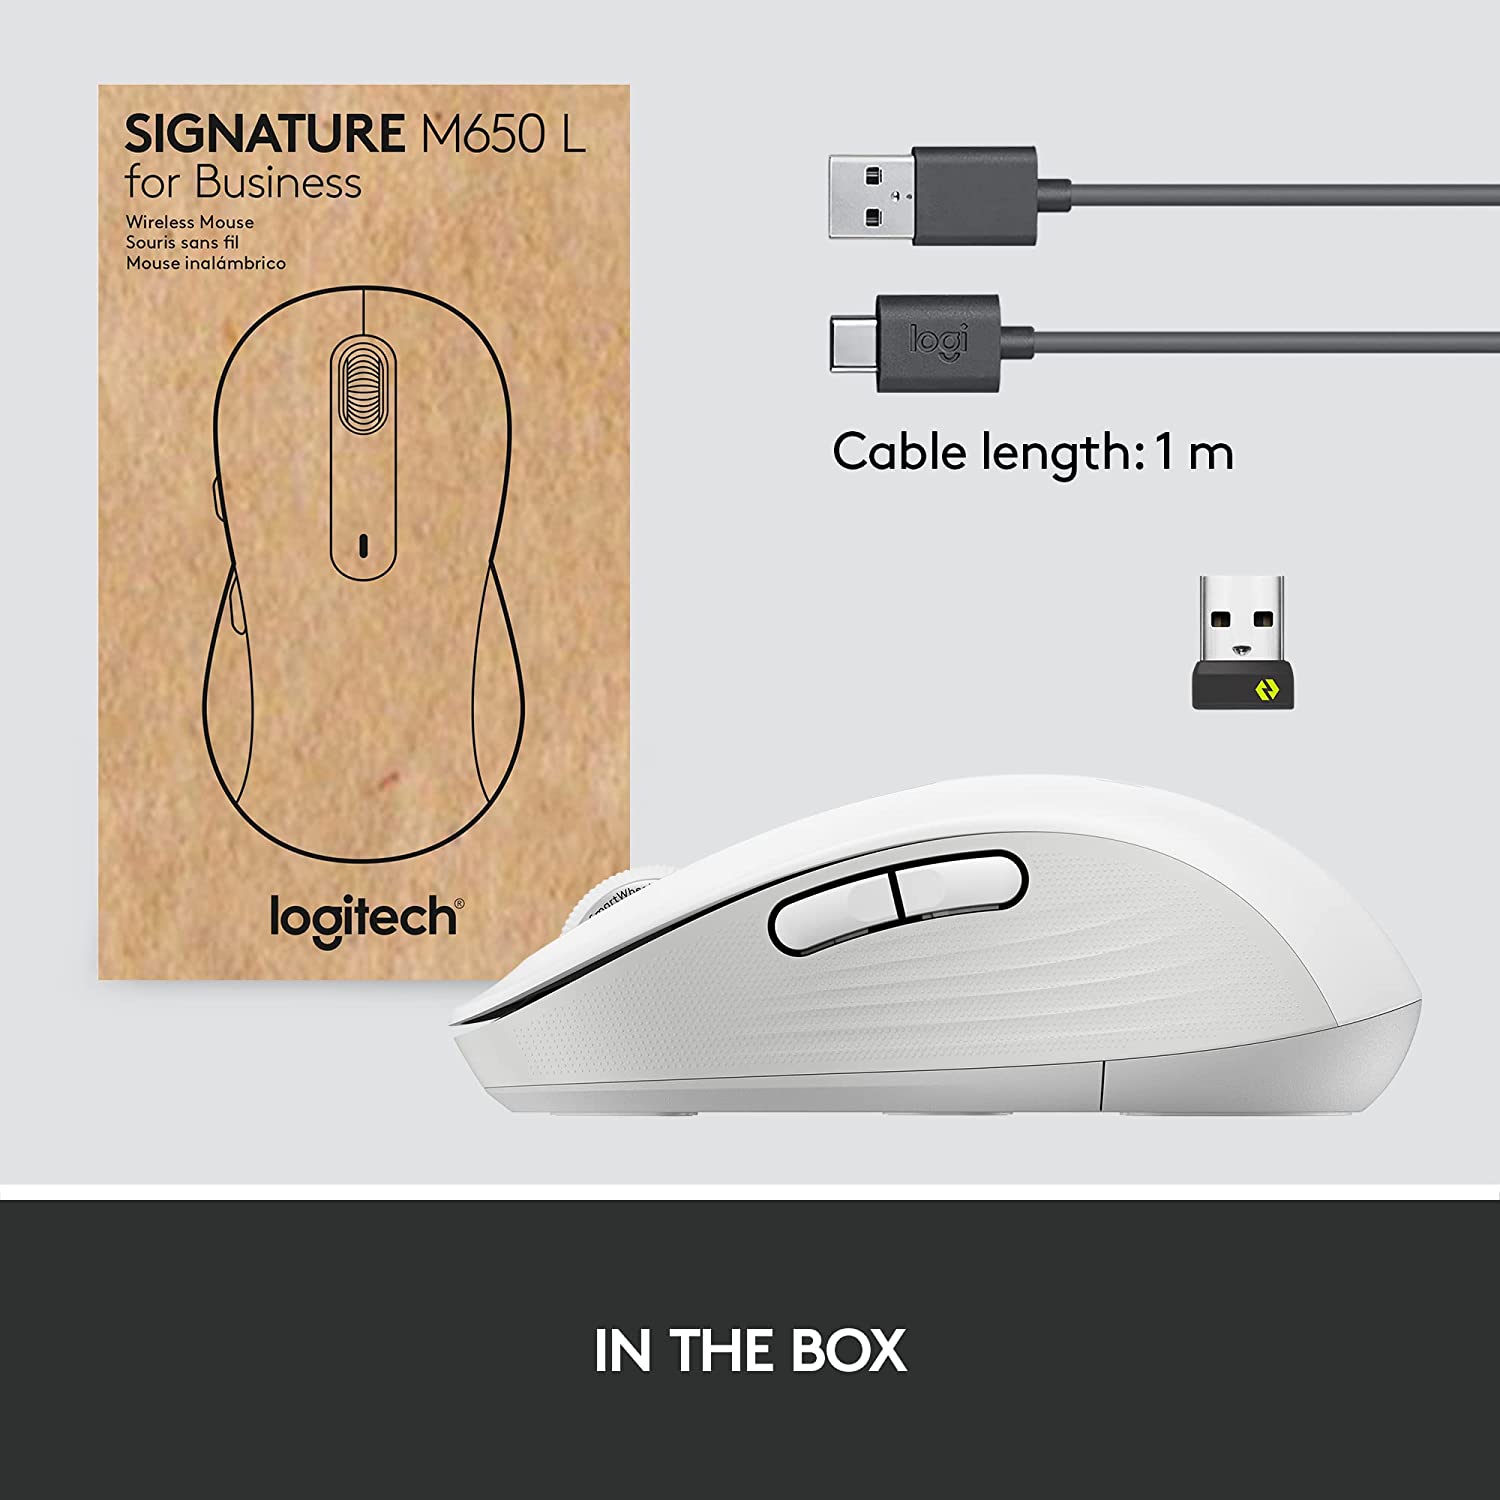 LOGITECH Signature M650 Wireless Mouse for Business